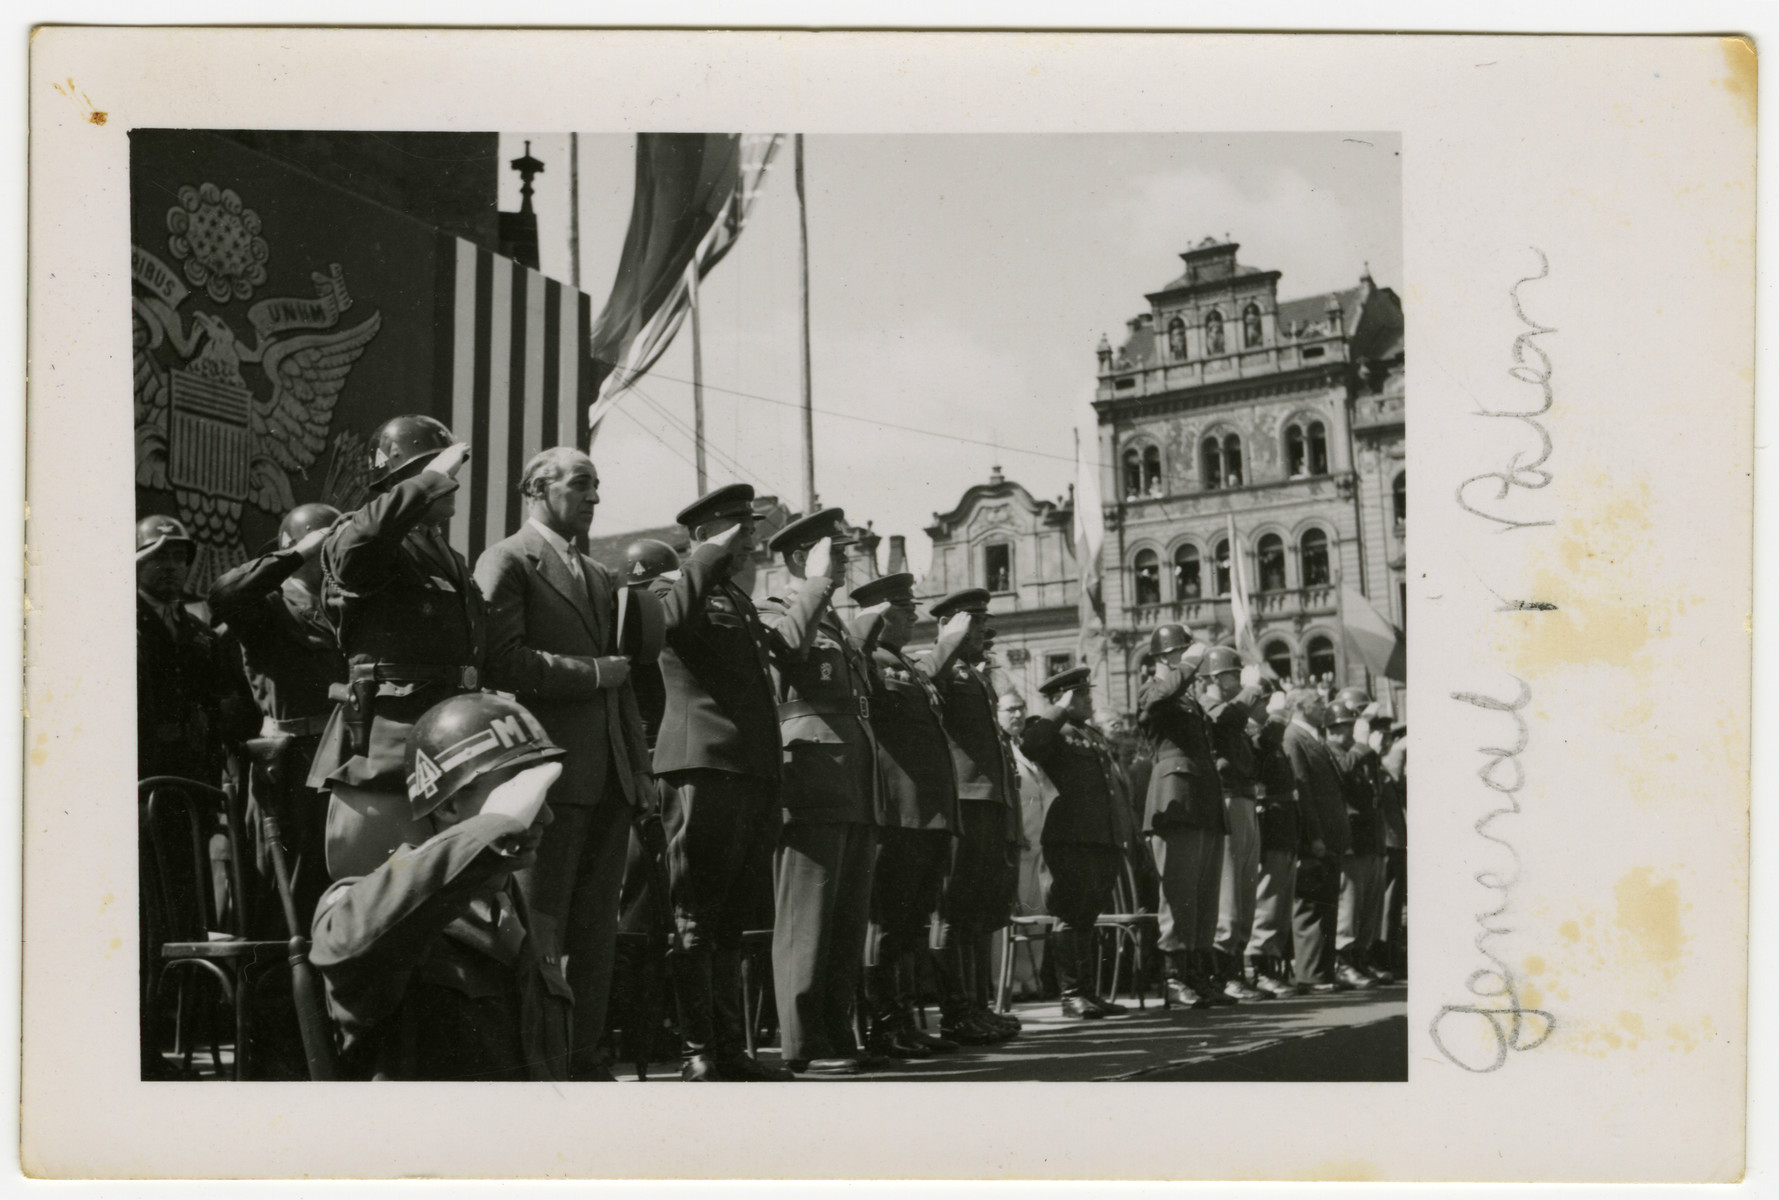 General George Patton stands on a reviewing stand and salutes along with several soldiers in Pilsen, Czechoslovakia on its liberation day.